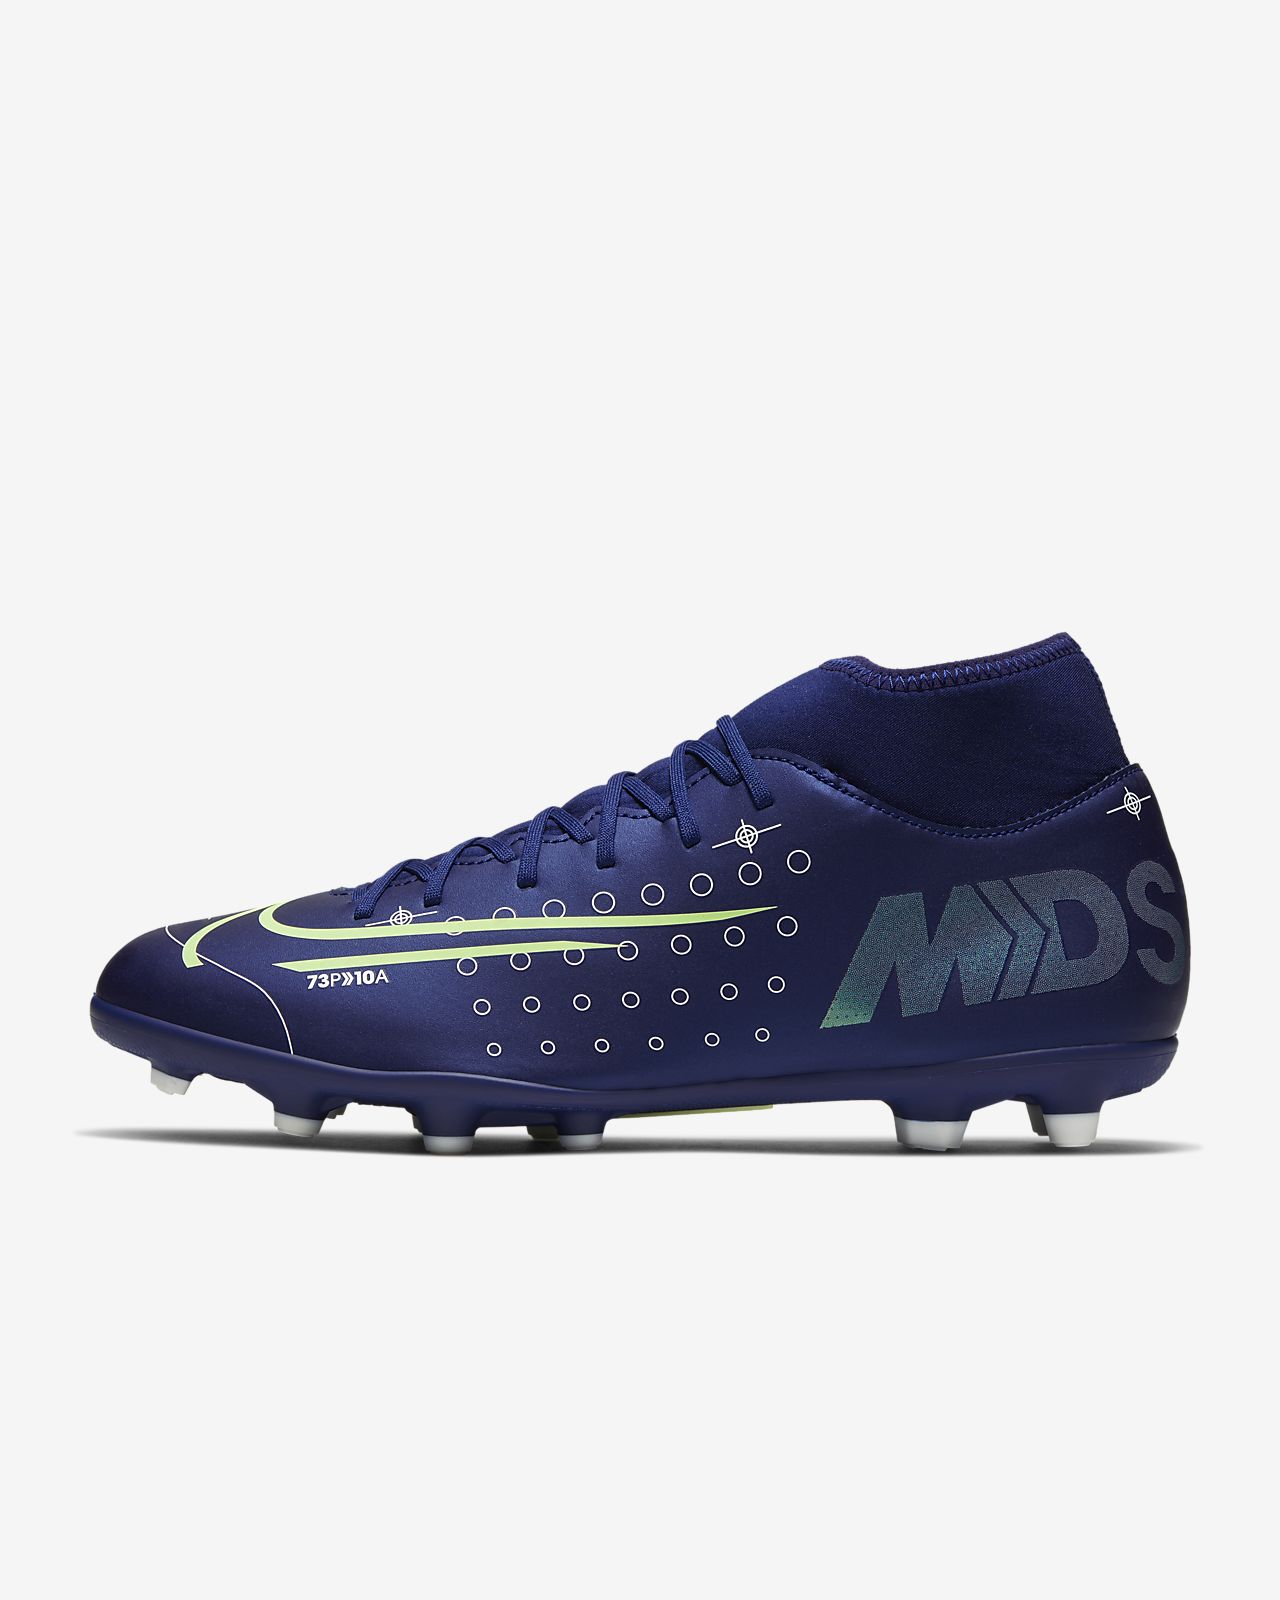 Latest Nike Mercurial SuperFly IV FG Mens Soccer Cleats